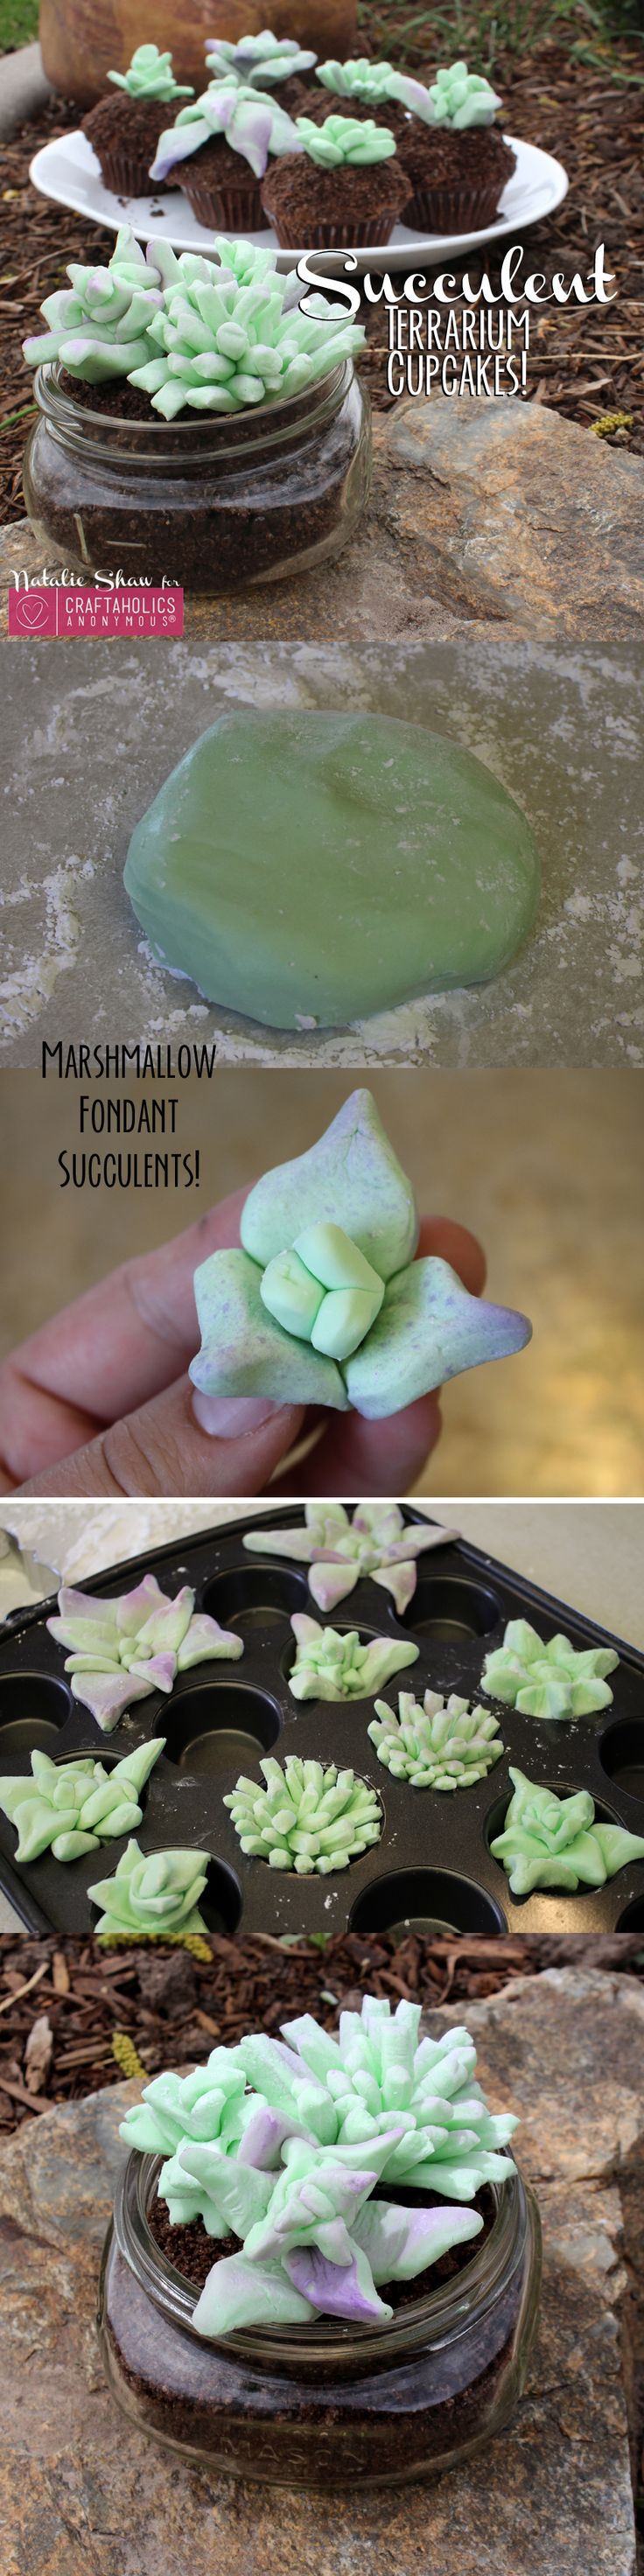 How to make Succulent Cupcakes || Love these! Perfect for spring/summer gatherin...